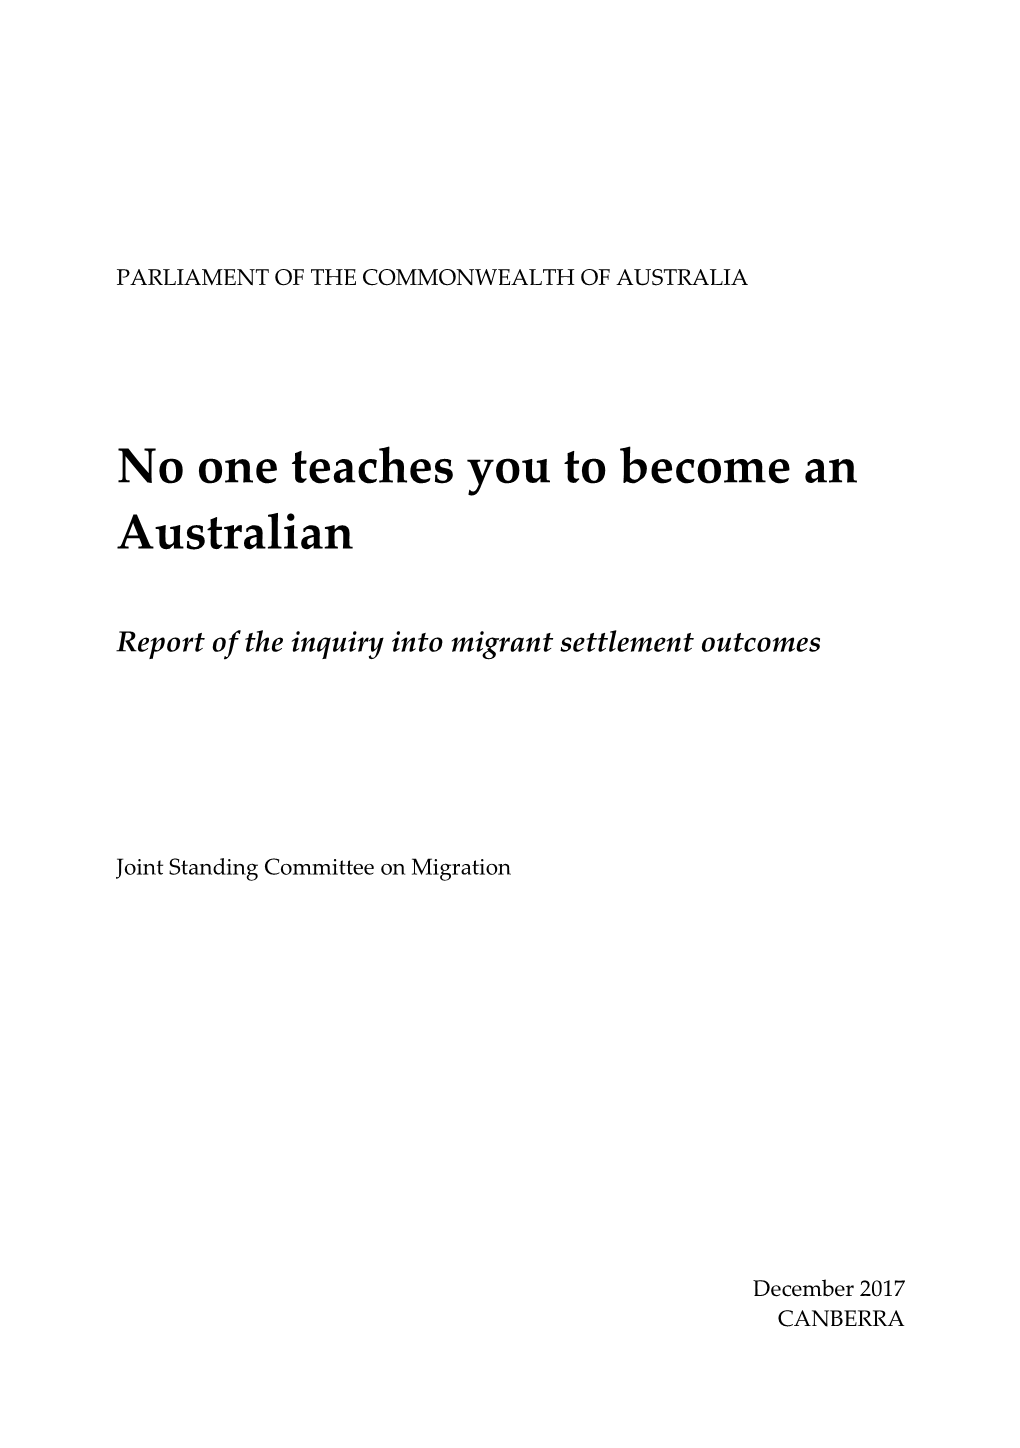 No One Teaches You to Become an Australian